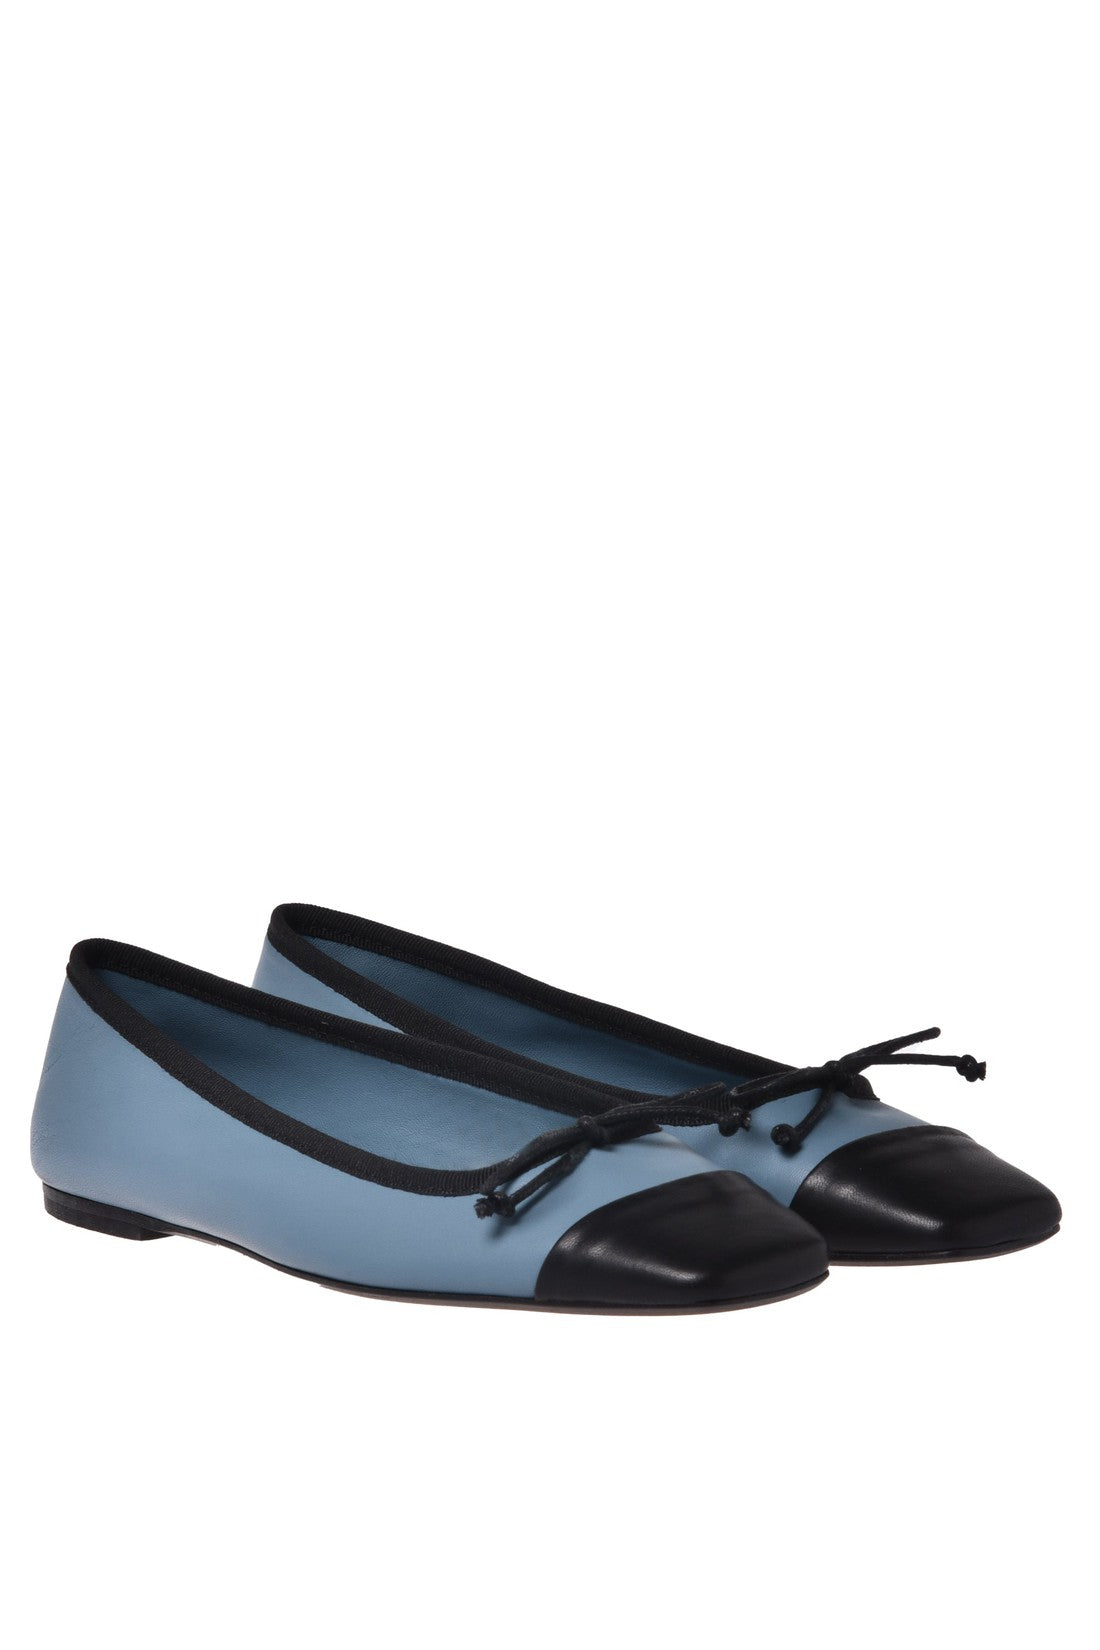 BALDININI-OUTLET-SALE-Ballerina-pump-in-black-and-blue-nappa-leather-Halbschuhe-ARCHIVE-COLLECTION-3_e3a4332d-9299-4752-989a-f75db31754b5.jpg